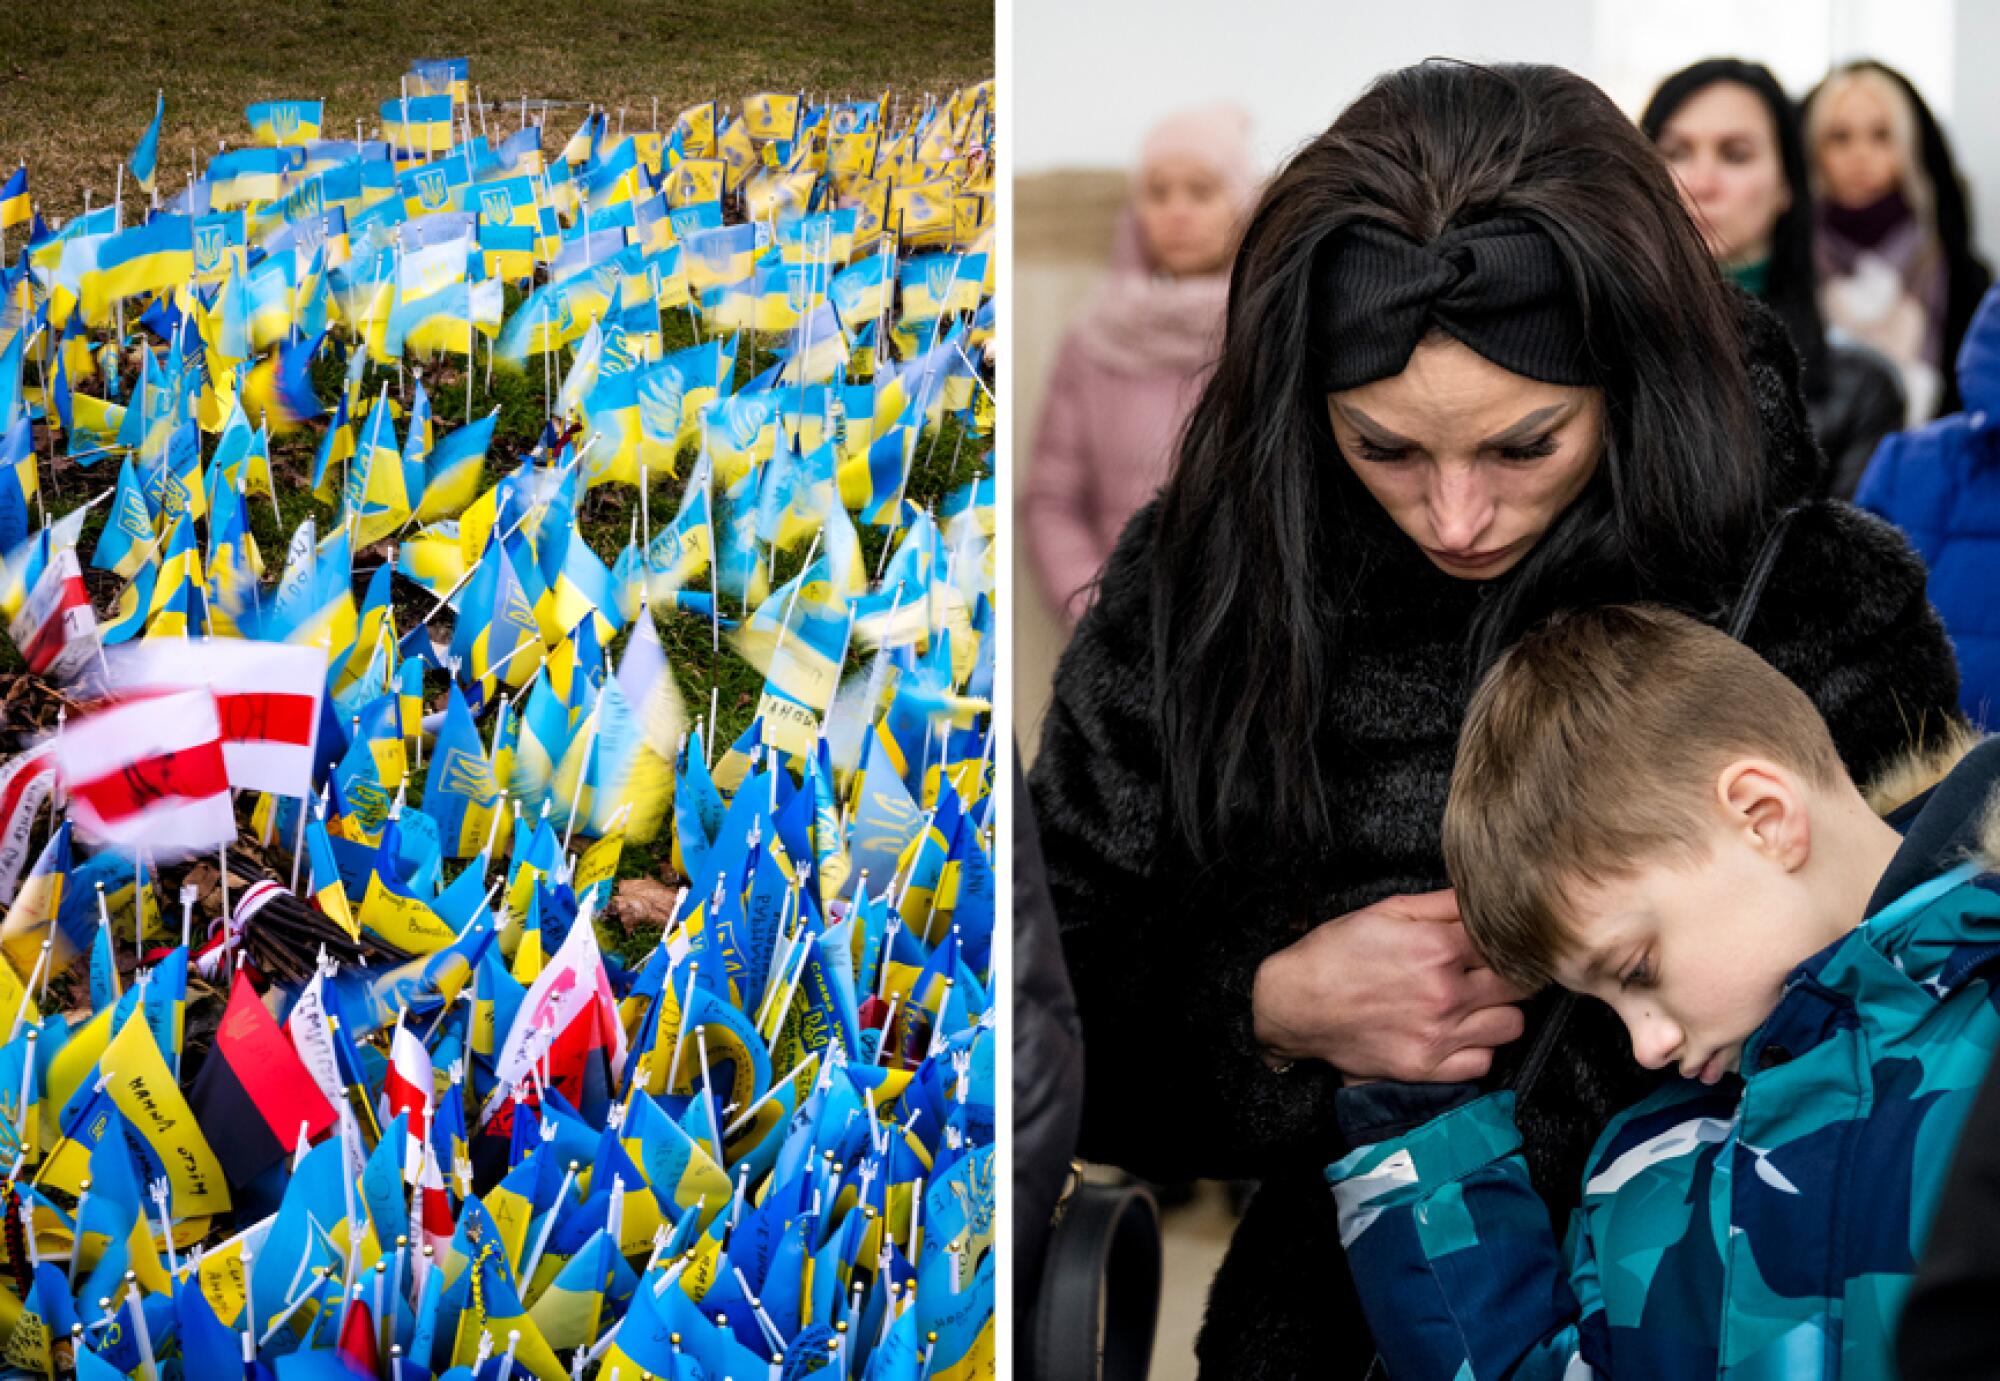 A diptych image: At left, a grassy area densely covered with small Ukrainian flags; and at right; a woman with a young boy.